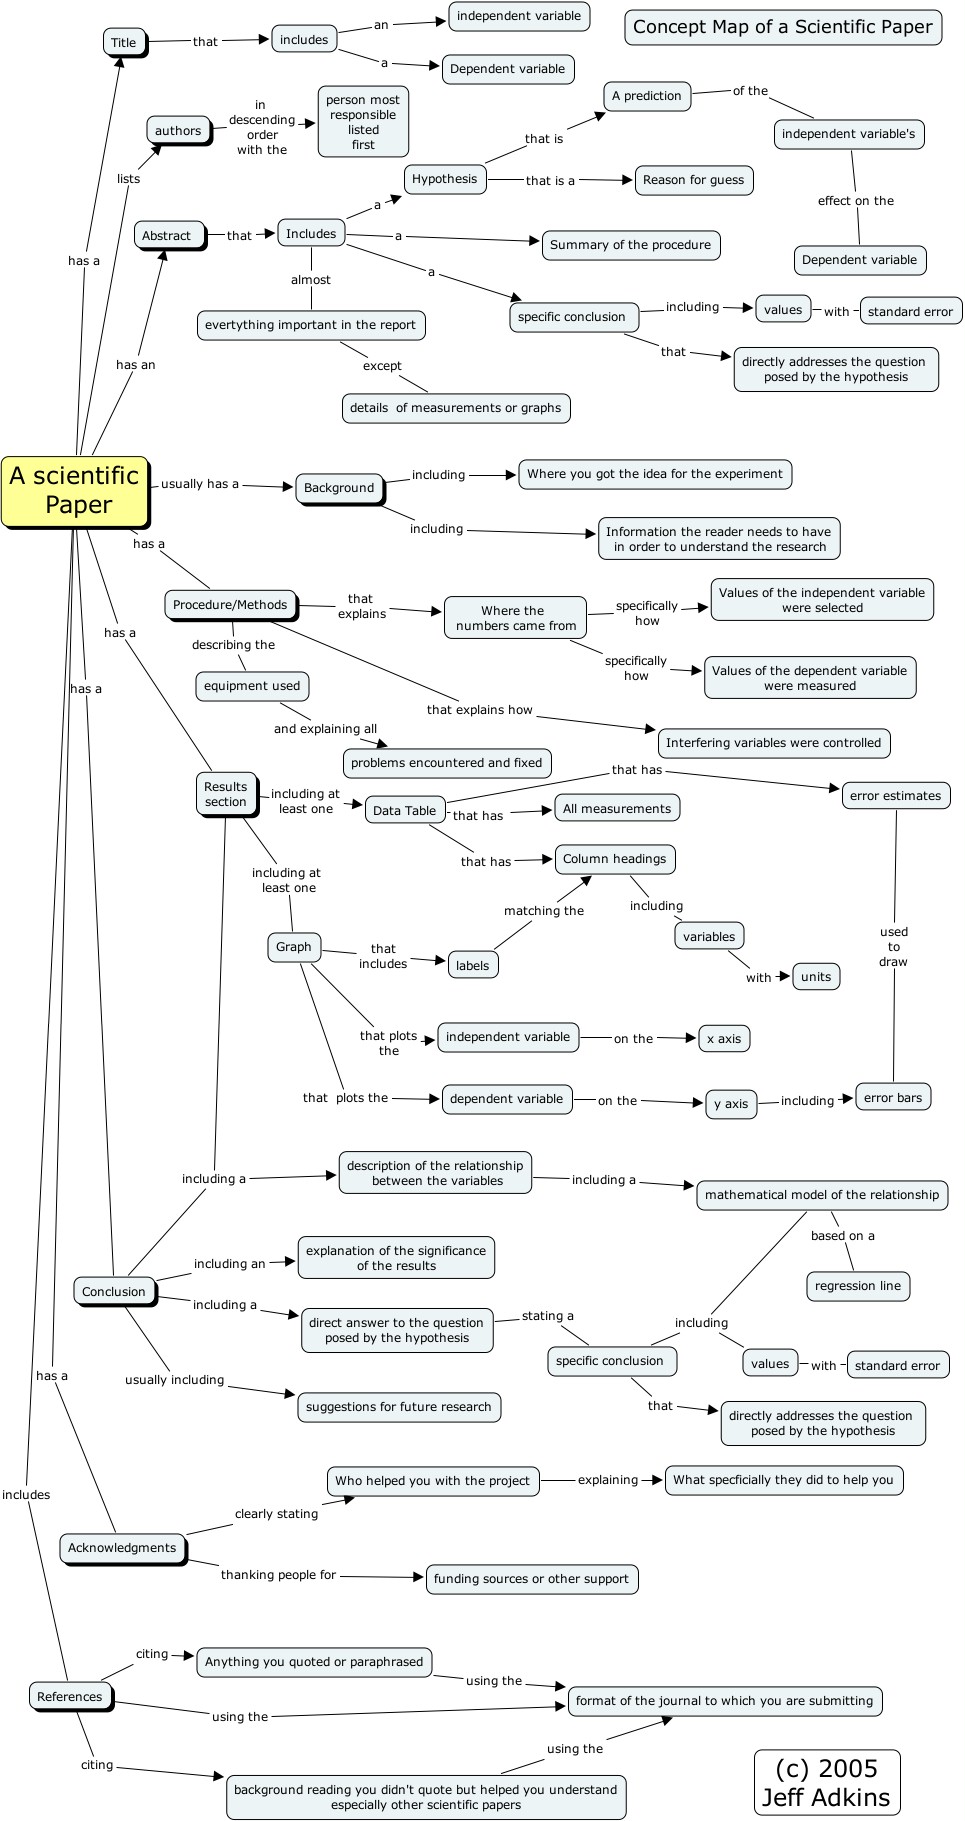 Links to information about concept maps